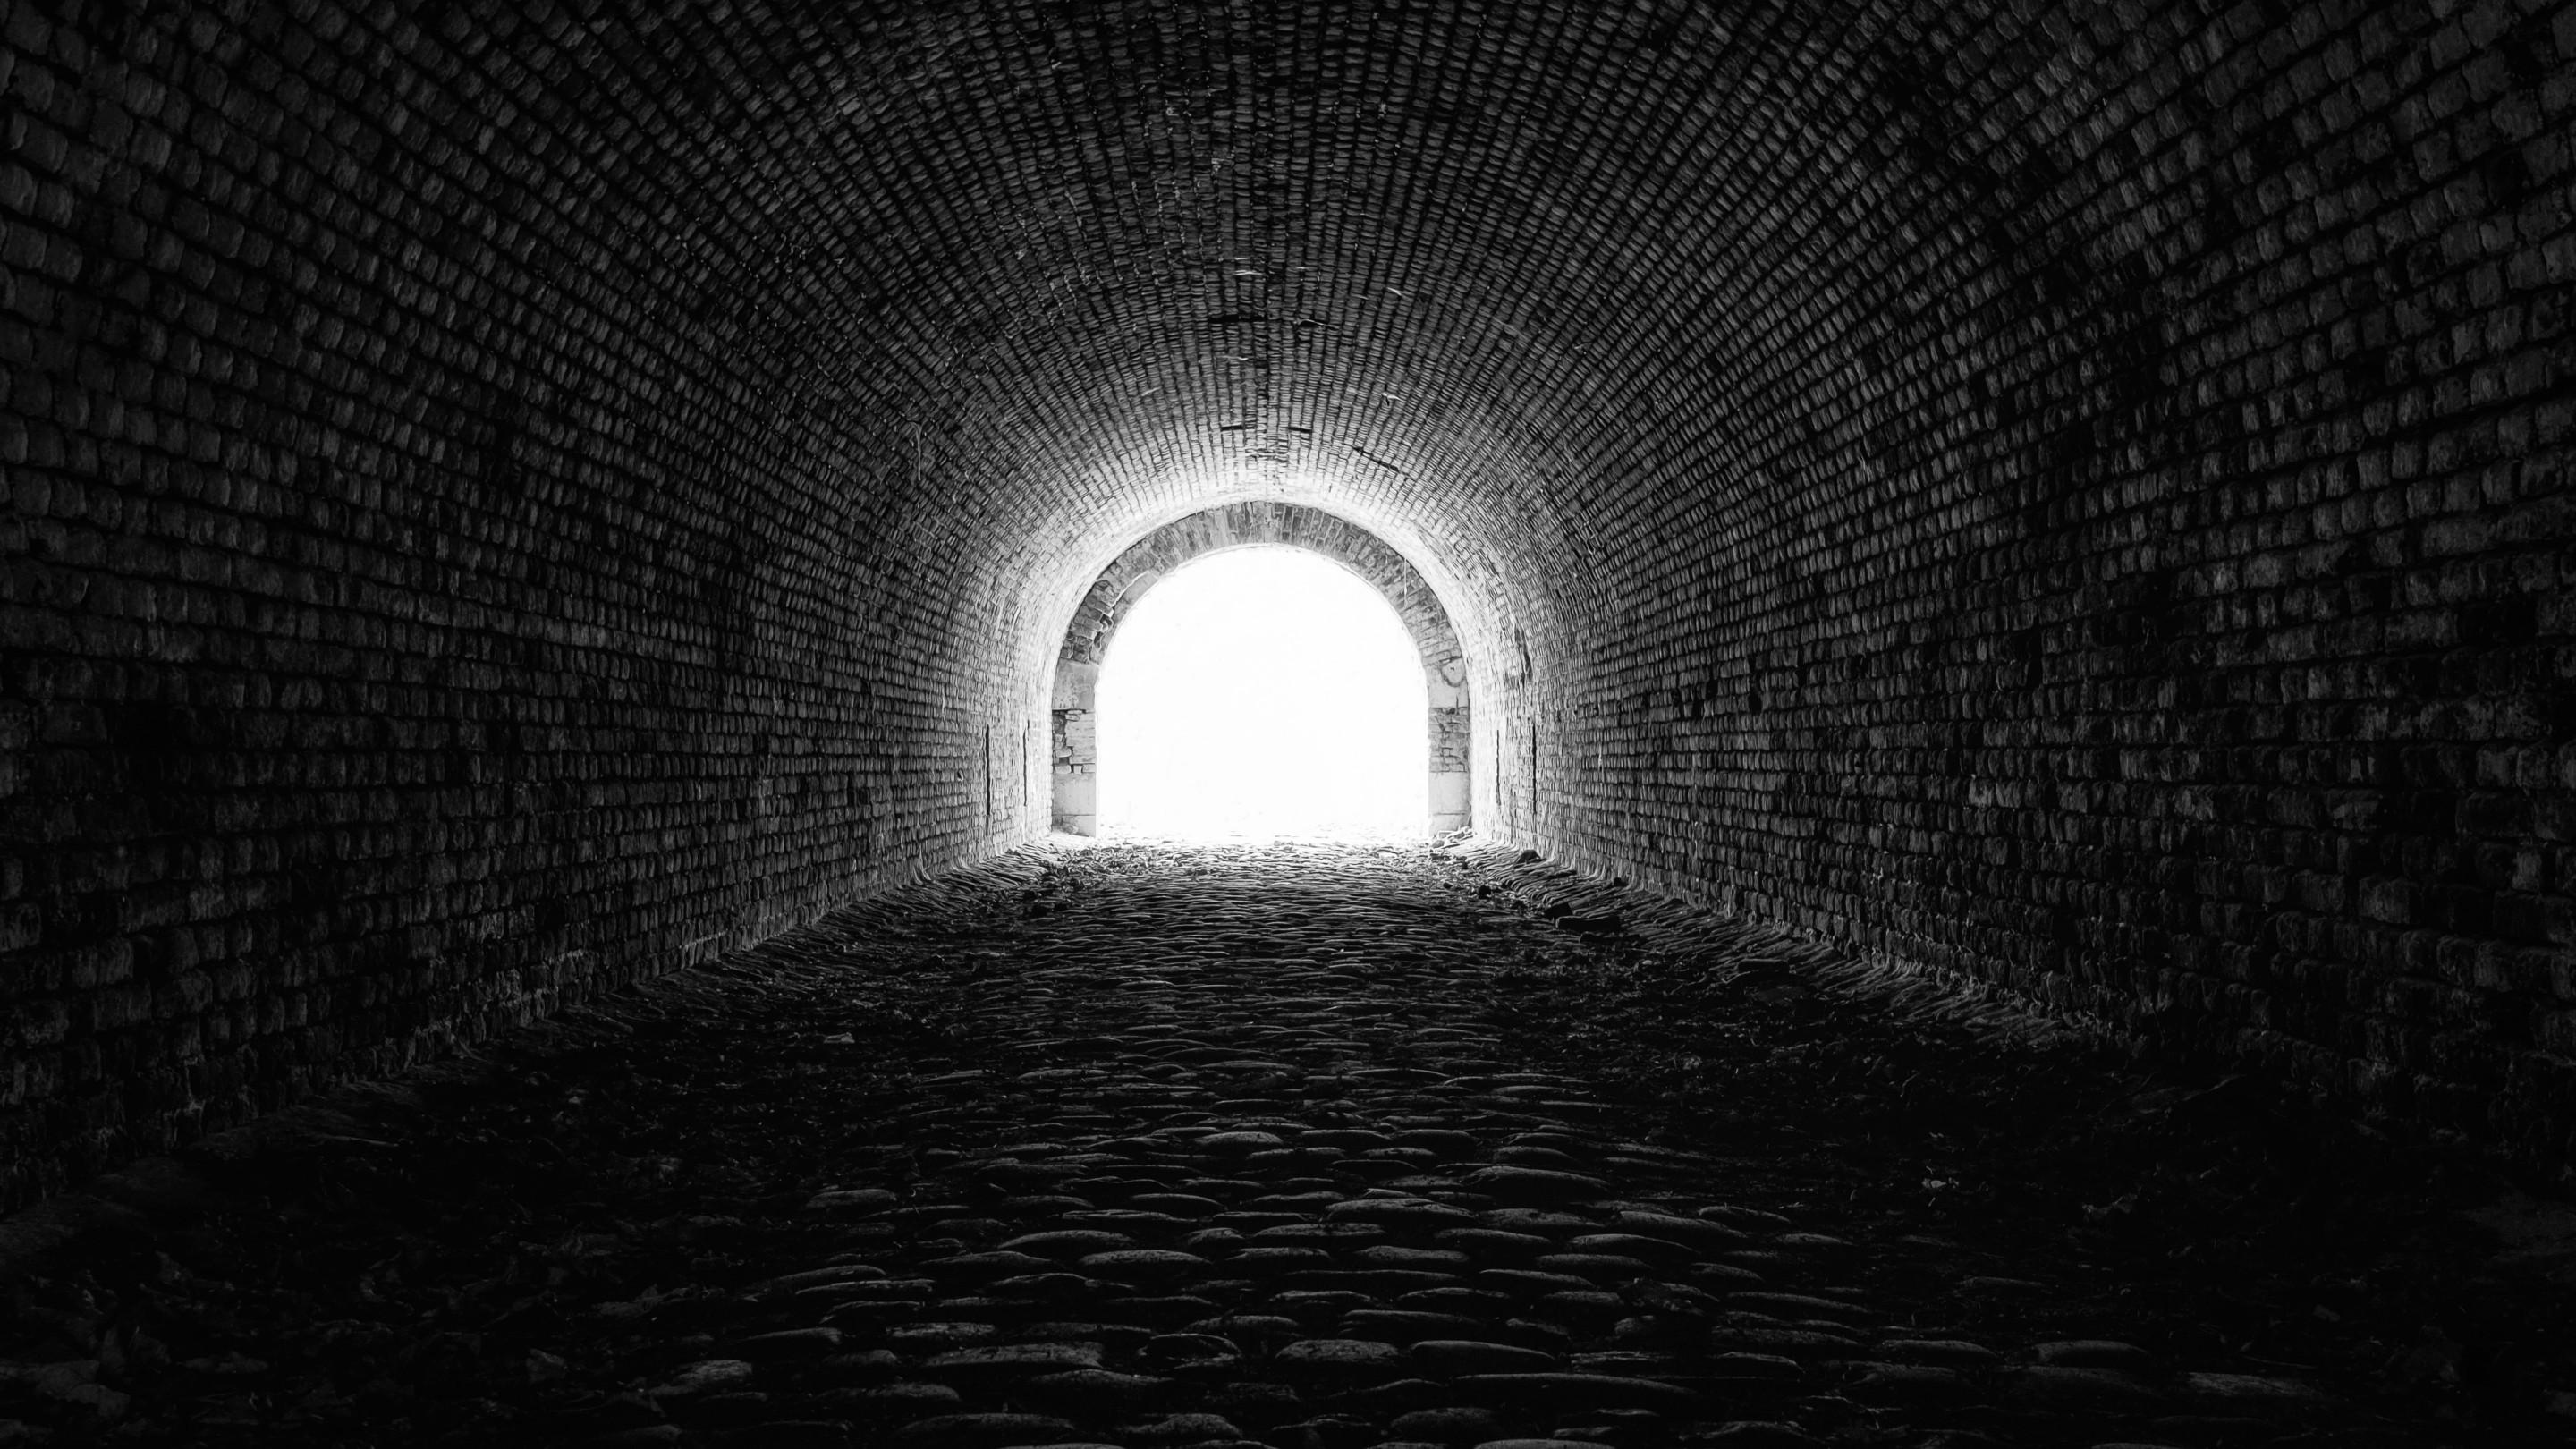 Download wallpaper: Light at the end of the tunnel 2880x1620